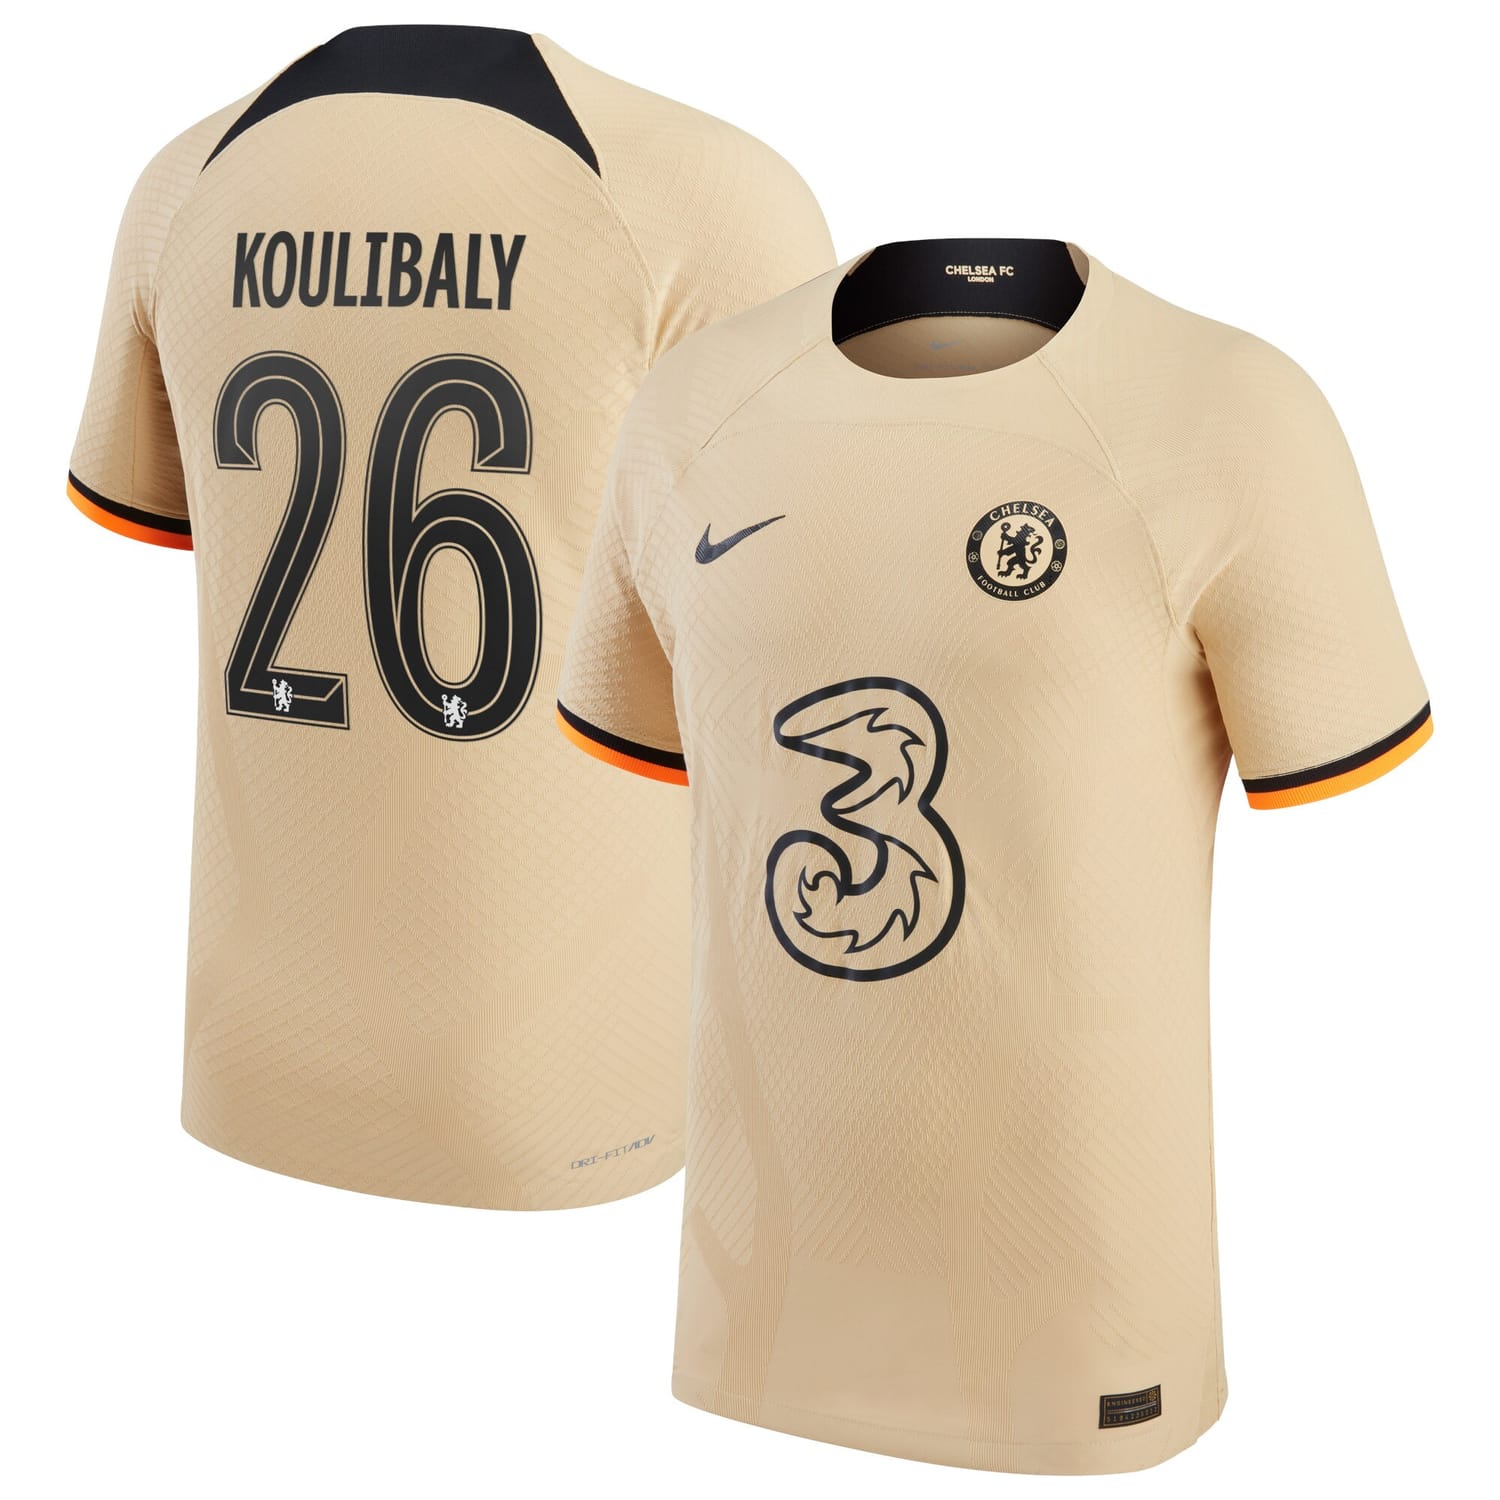 Premier League Chelsea Third Cup Authentic Jersey Shirt 2022-23 player Kalidou Koulibaly 26 printing for Men